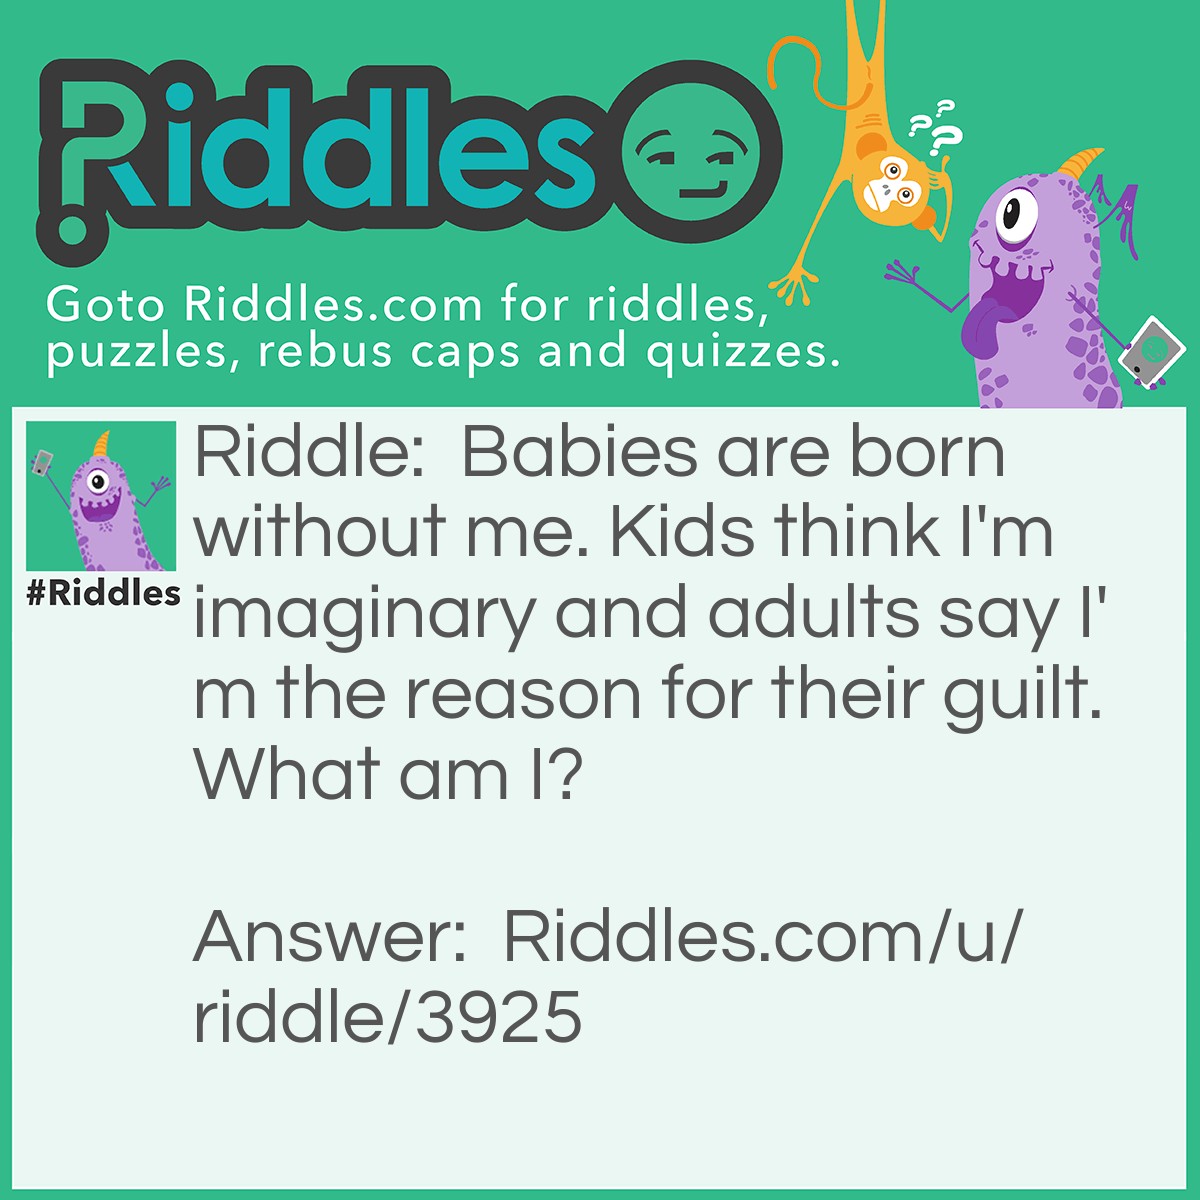 Riddle: Babies are born without me. Kids think I'm imaginary and adults say I'm the reason for their guilt. What am I? Answer: I don't know answer